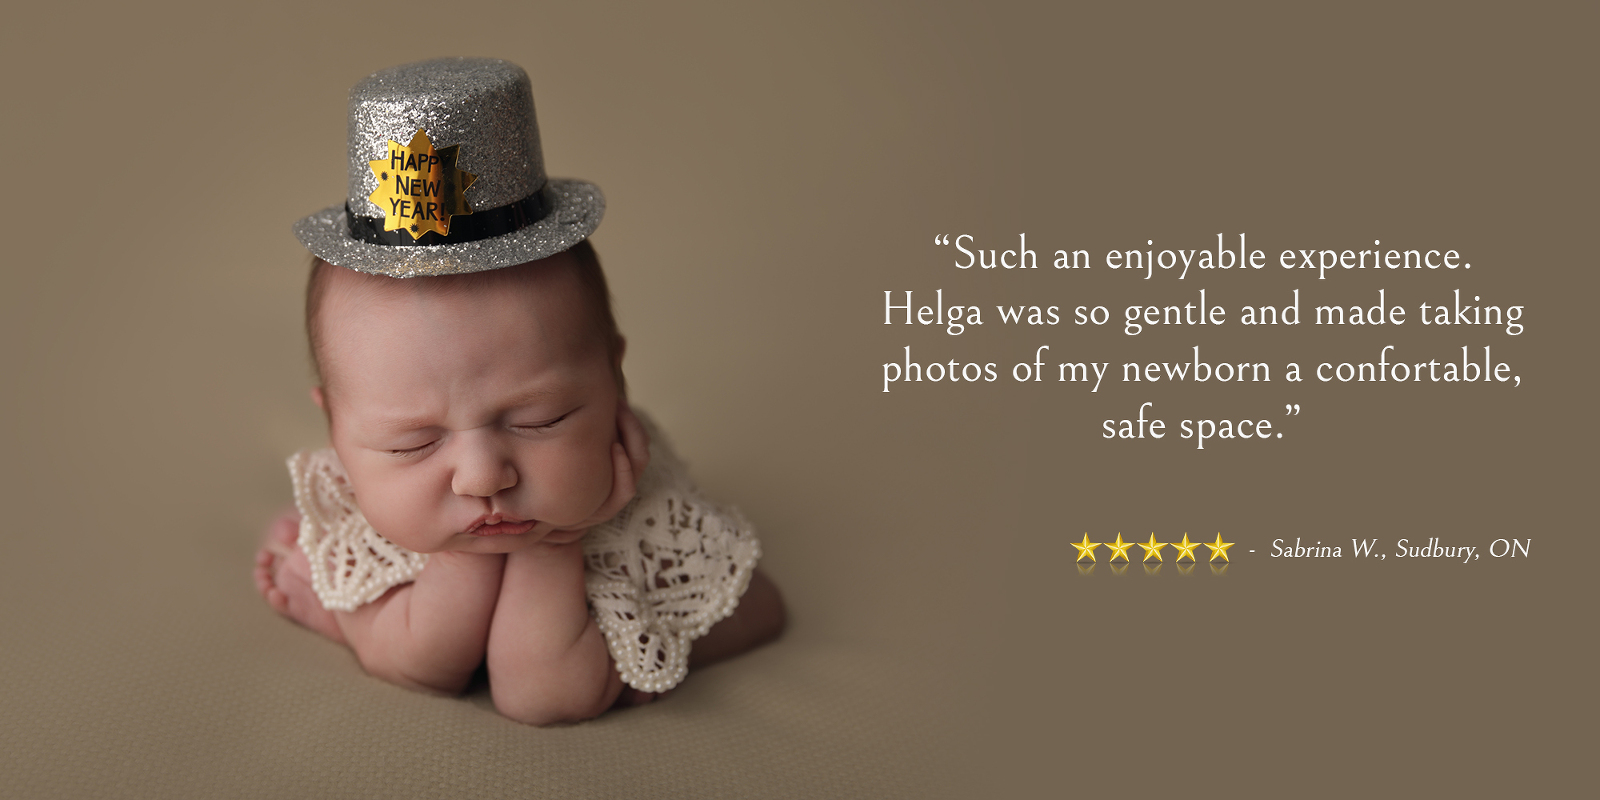 Testimonial - Studio newborn portrait on a beige background of a sleeping baby with a Happy New Years hat in the froggy pose. Image by Helga Himer Photography, Sudbury, Ontario.